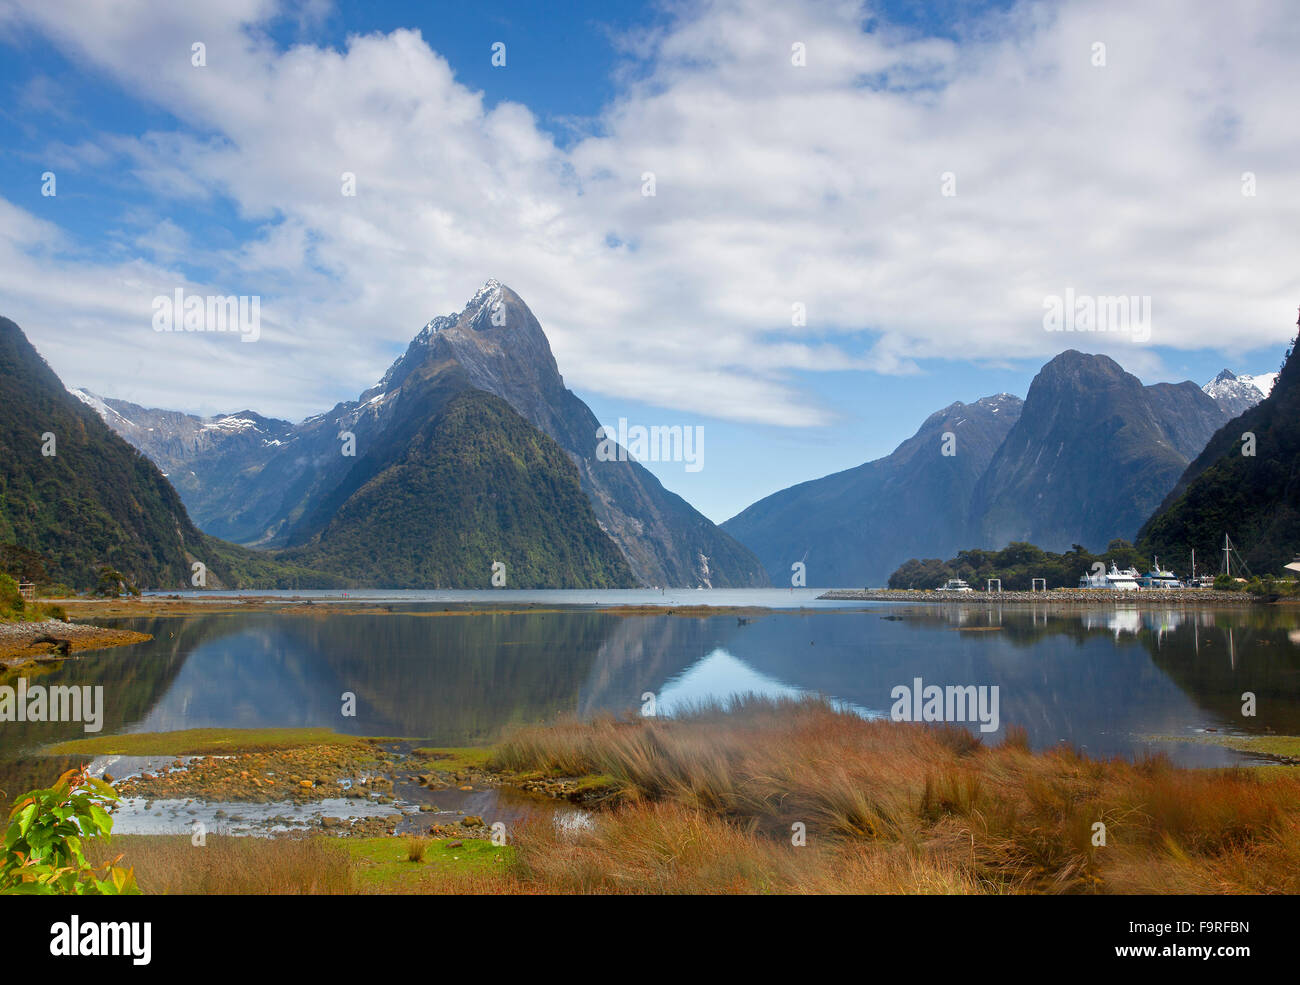 Milford Sound looking northwest from the township. The triangle shape of Mitre Peak is 1,692 m (5,551 ft) above the sea level. Stock Photo